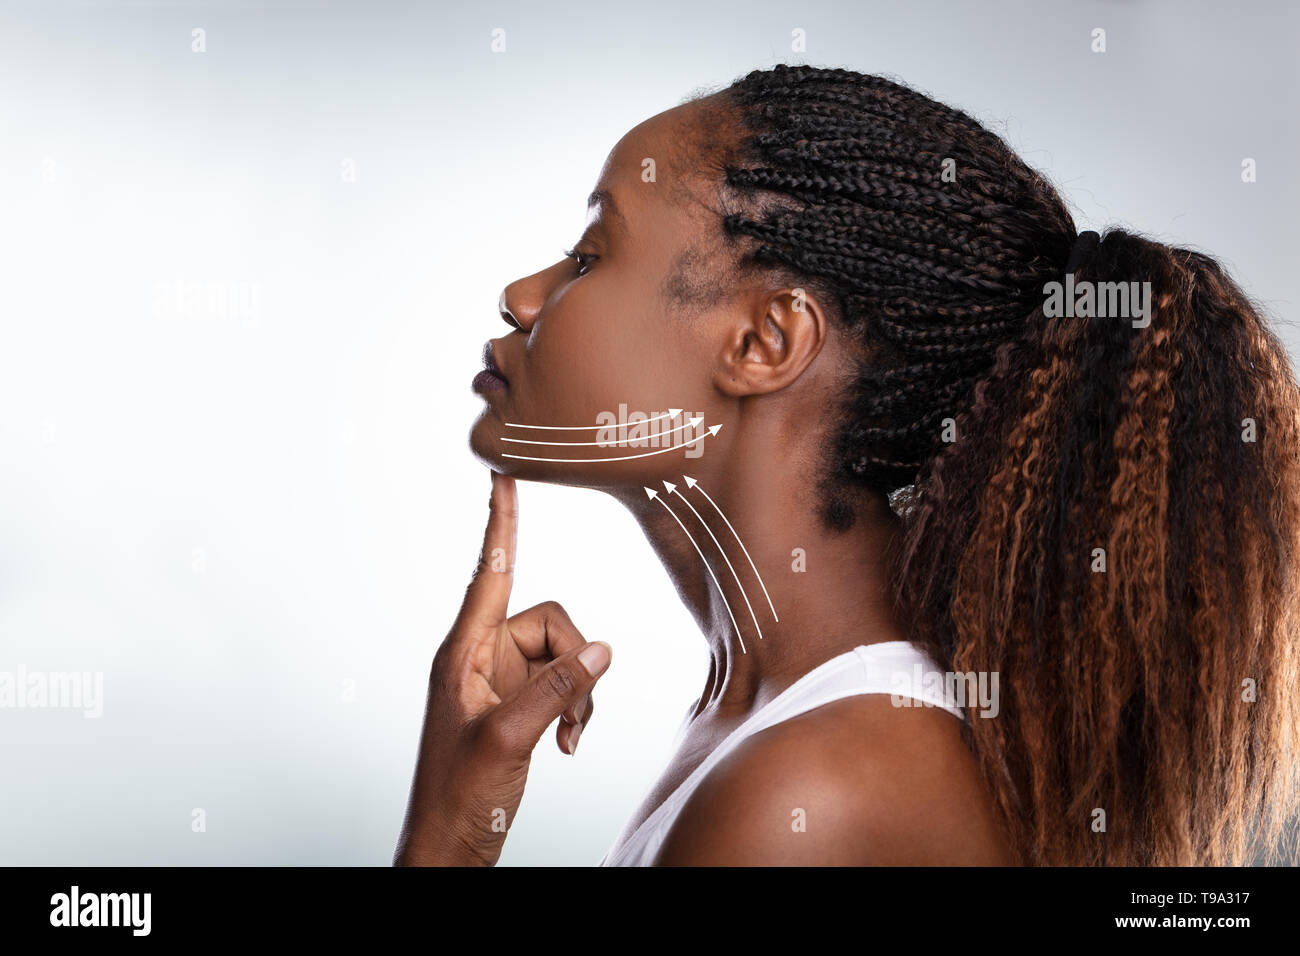 Woman With Arrows On Her Face Over White Background Stock Photo